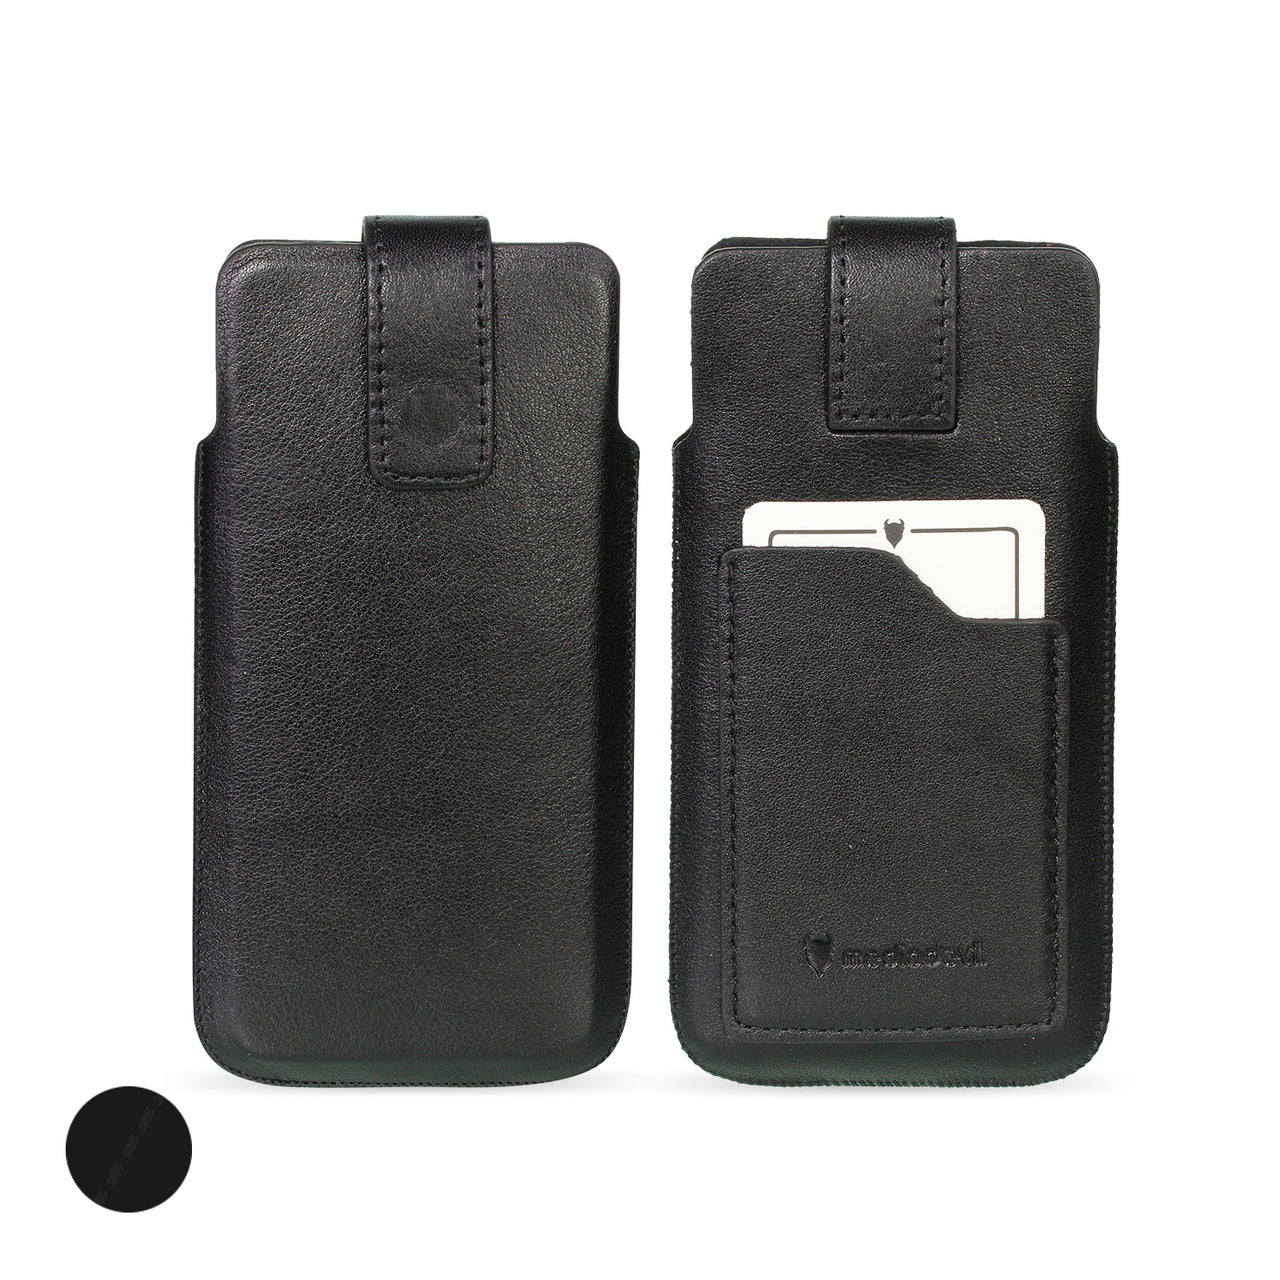 Genuine Leather Pouch Phone Case - Universal Size 2 (S)